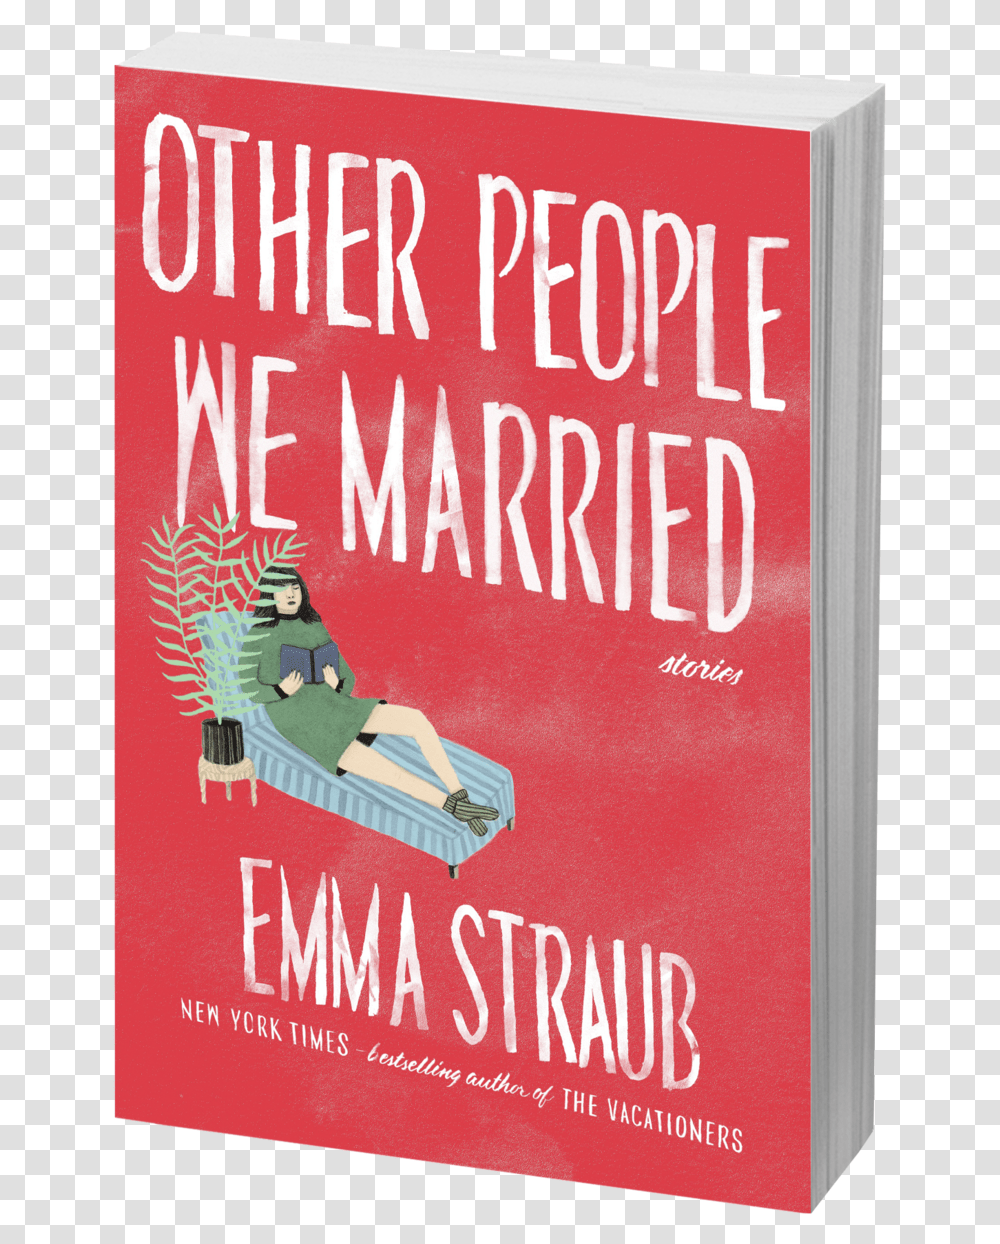 Other People We Married - Emma Straub Flyer, Poster, Advertisement, Novel, Book Transparent Png